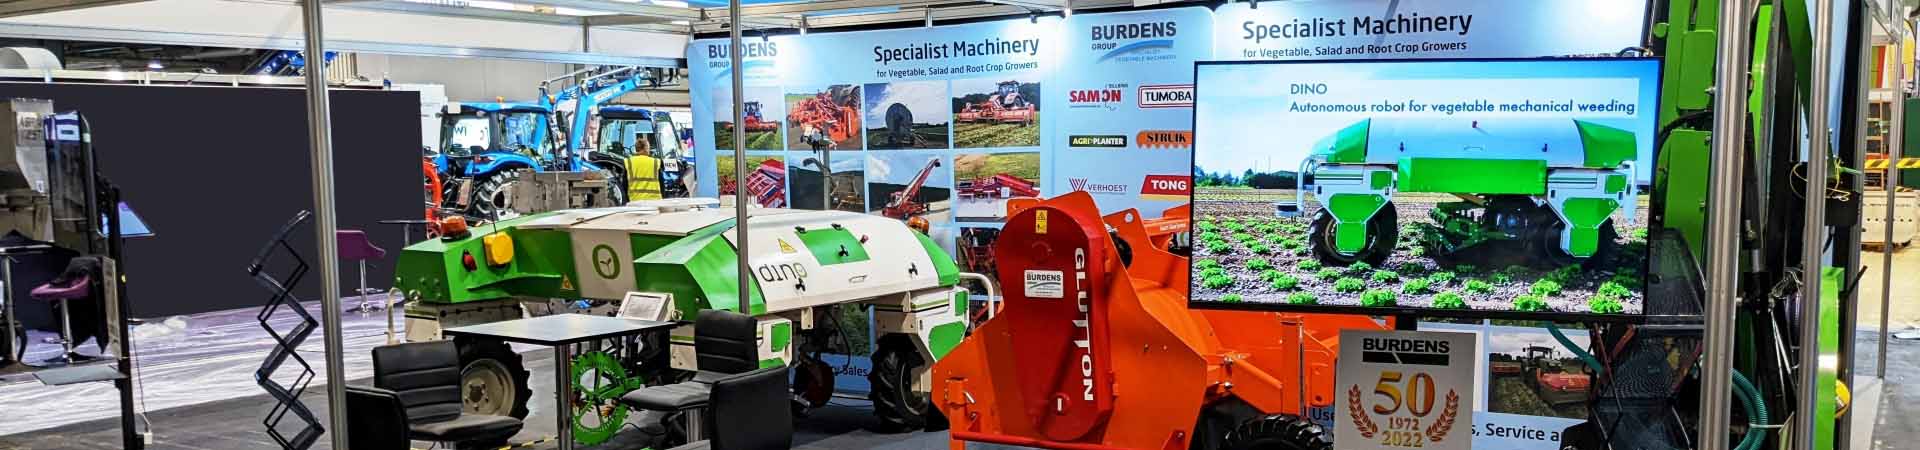 Burdens specialist vegetable machinery header shows and events